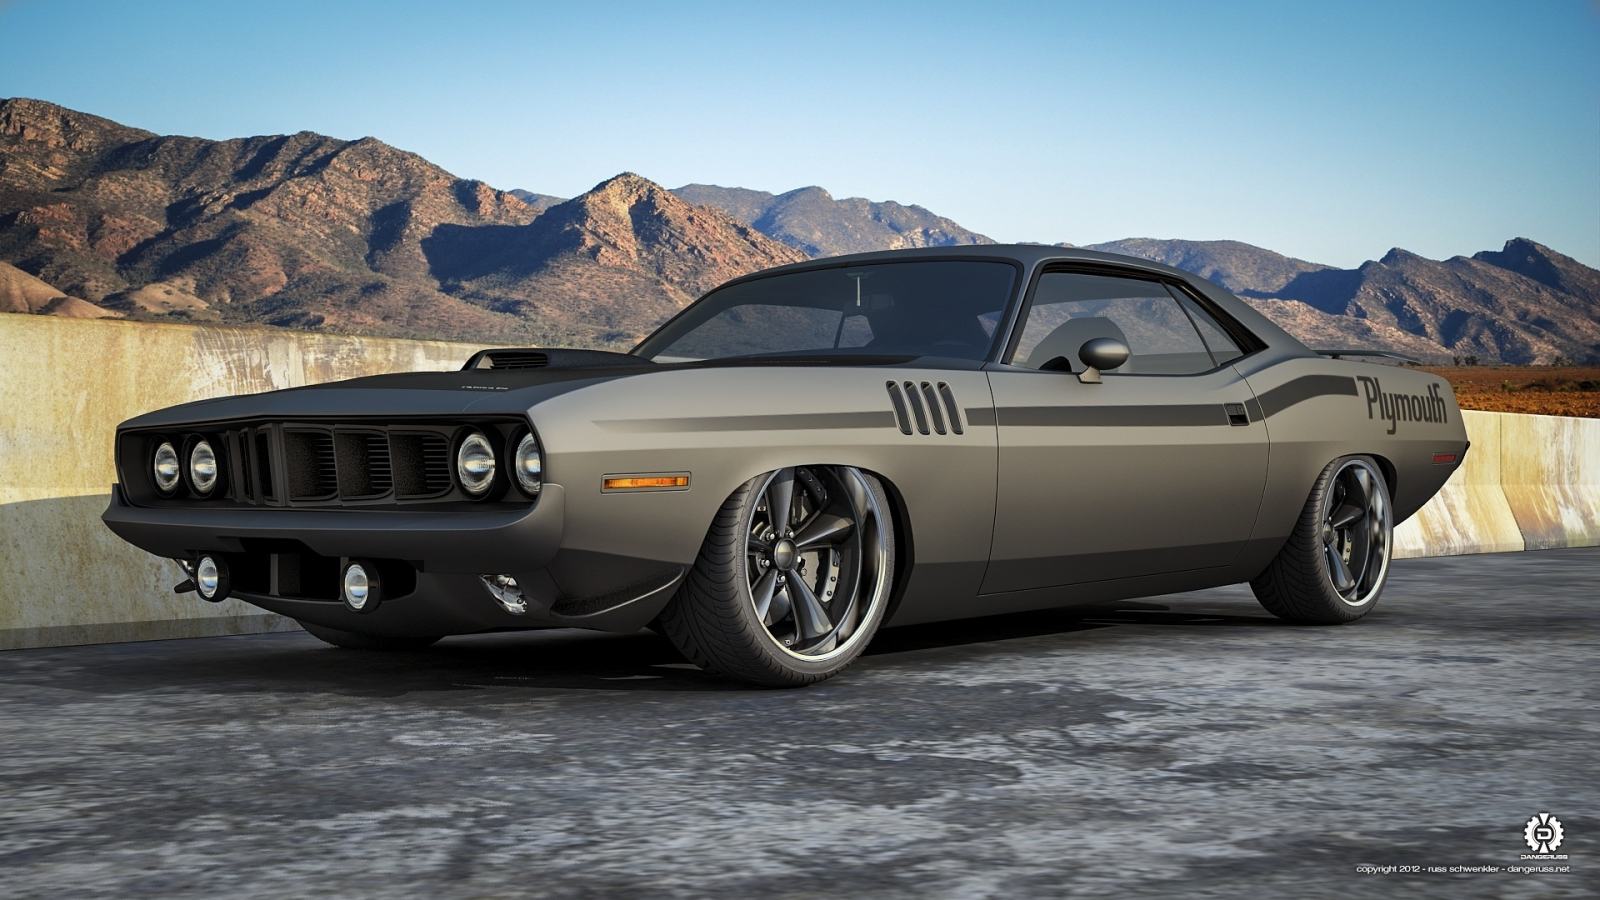 muscle car, barracuda, матовый, front, plymouth, горы, плимут, мускул кар